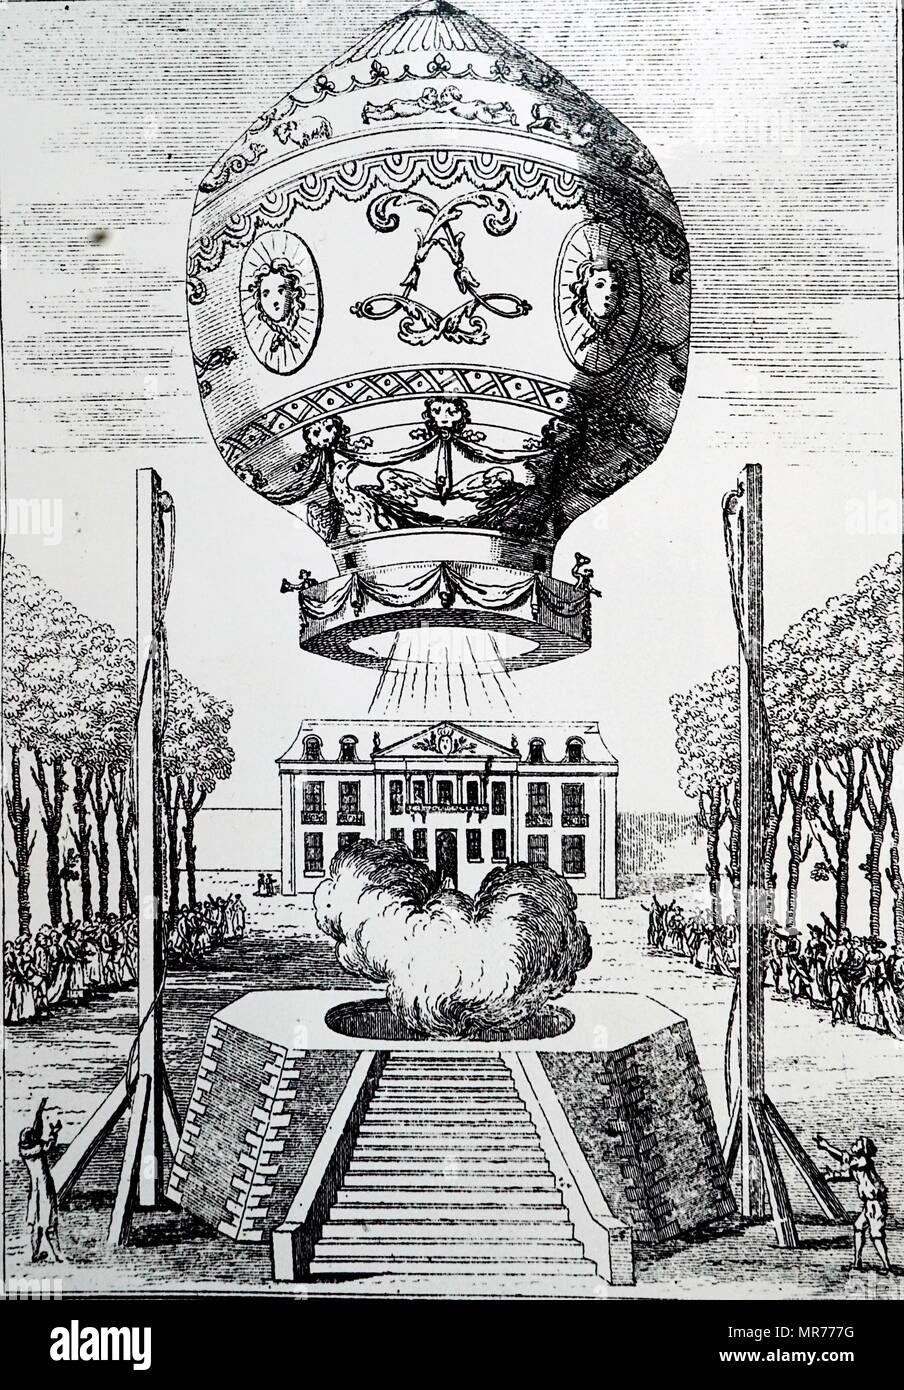 Engraving depicting the Montgolfier balloon making its ascent at the Chateau de la Muette. Invented by Joseph-Michel Montgolfier (1740-1810) and Jacques-Étienne Montgolfier (1745-1799). Dated 18th century Stock Photo